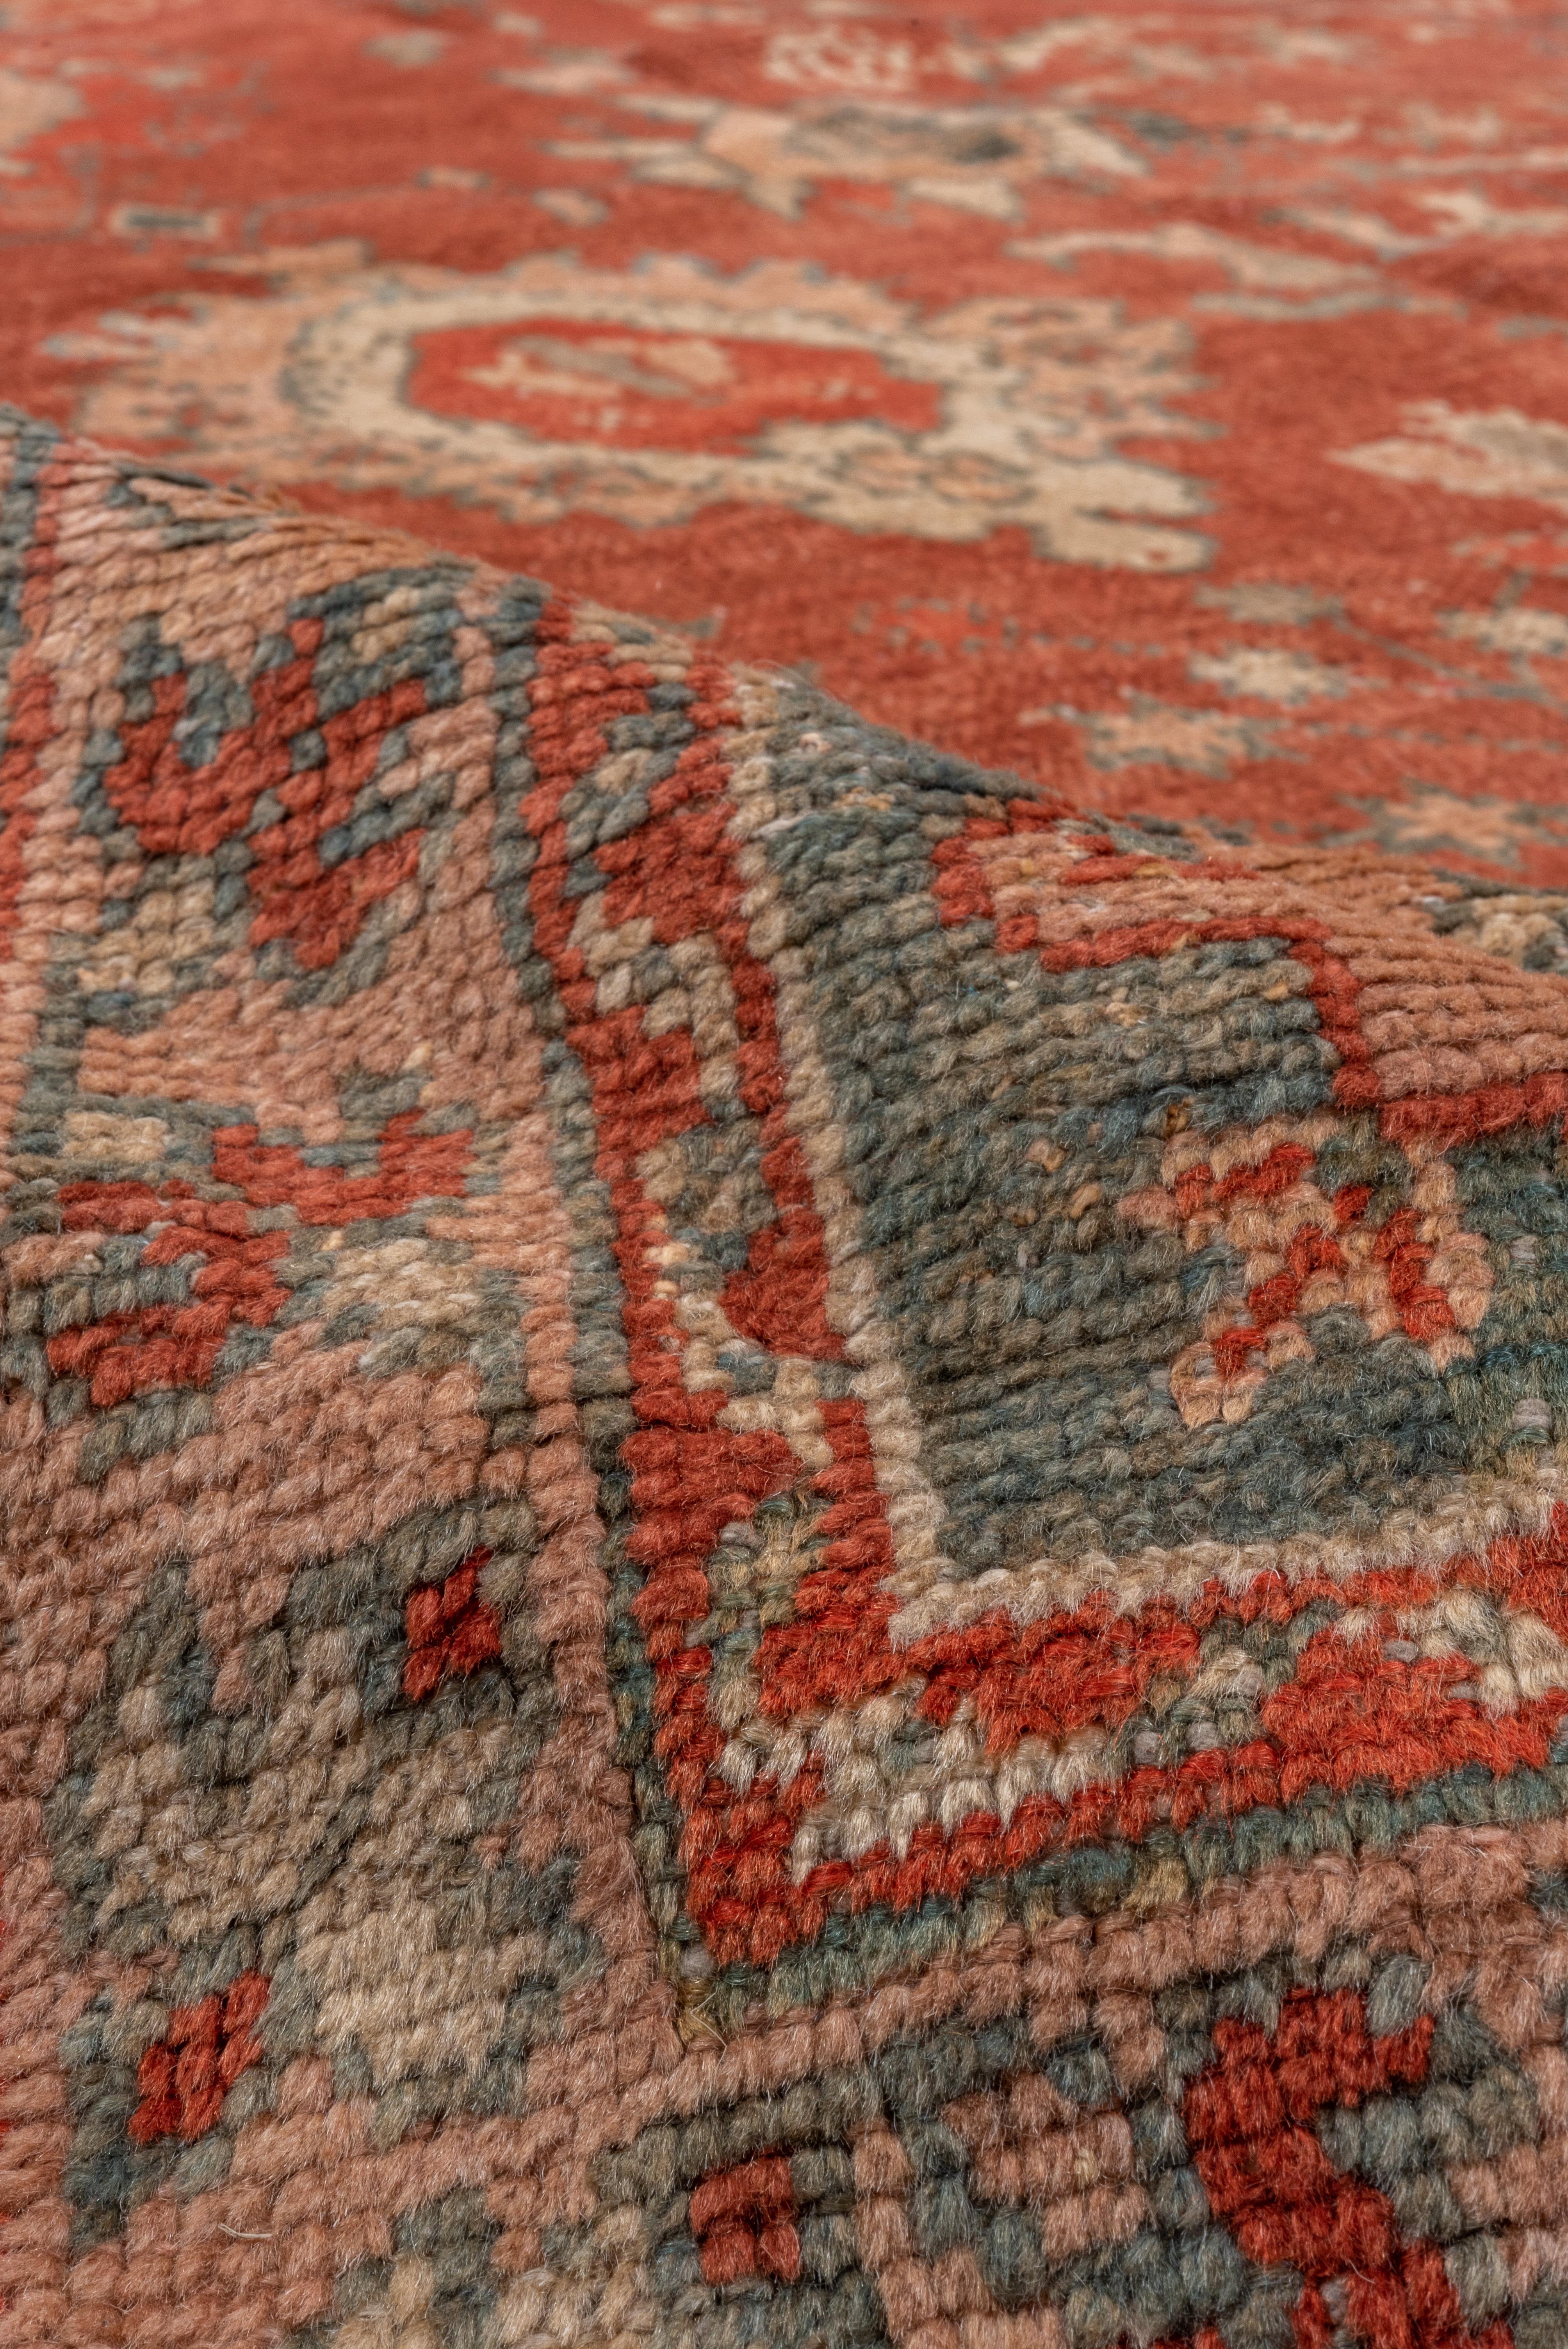 Early 20th Century 1900s Rare Antique Turkish Oushak Carpet, Rusty Red Allover Field, Green Borders For Sale